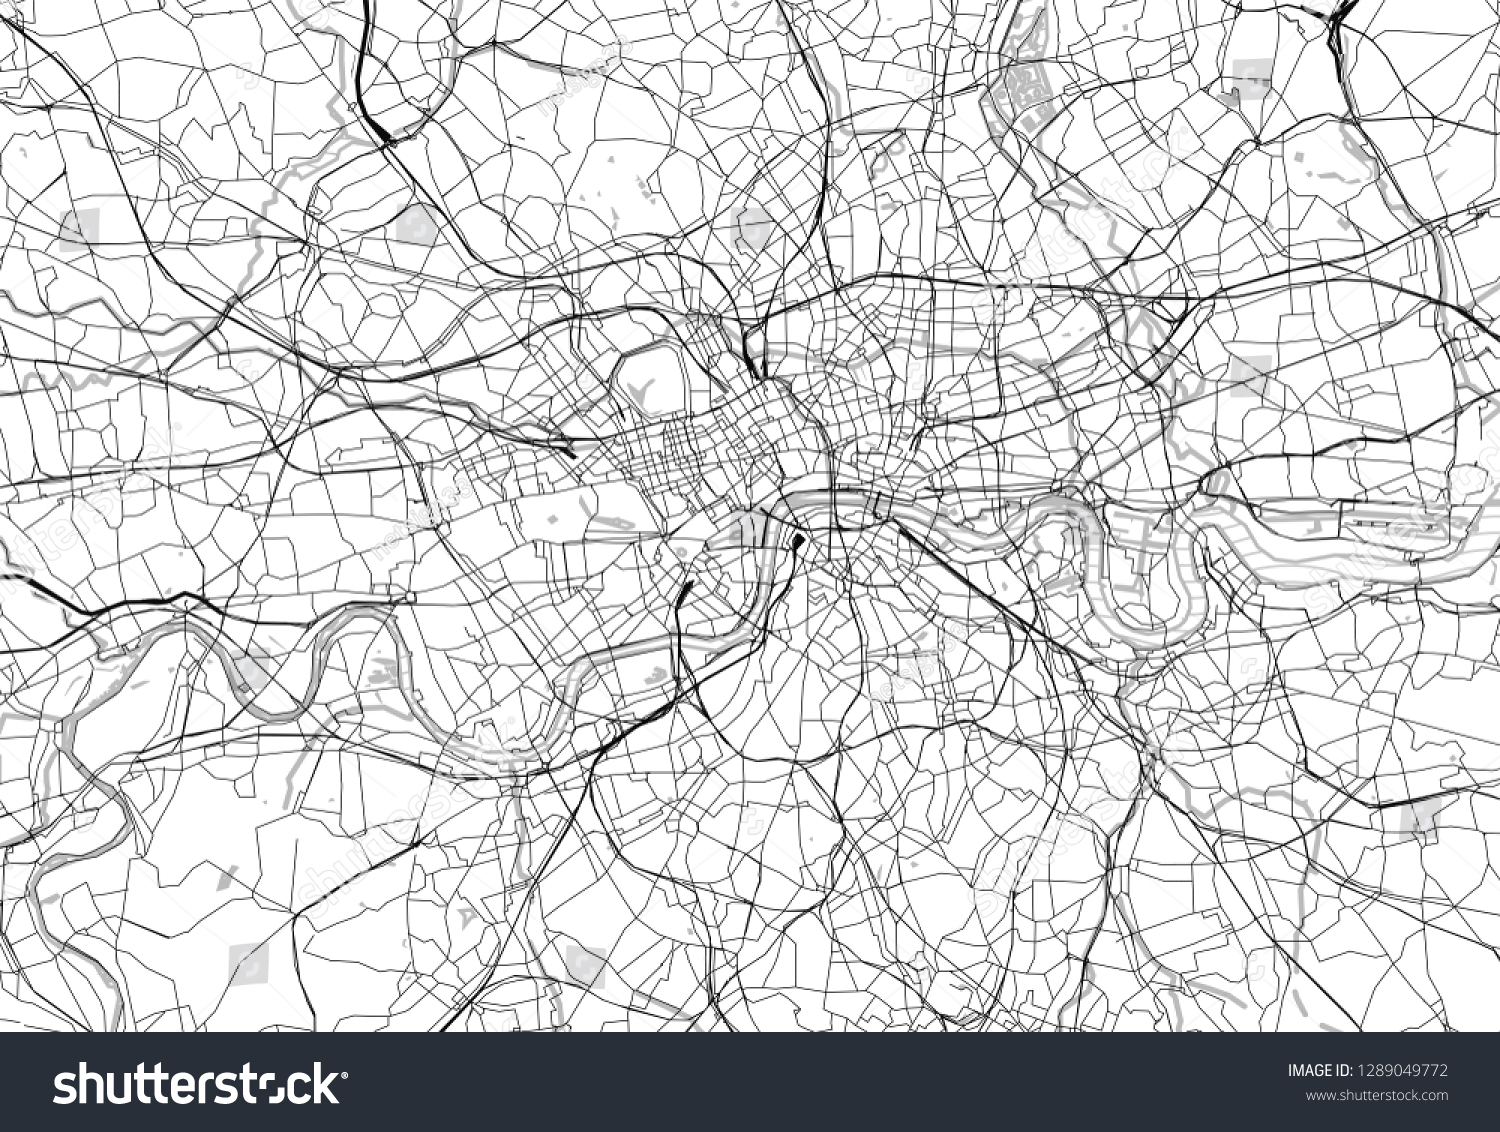 Stock Vector Area Map Of London United Kingdom This Artmap Of London Contains Geography Lines For Land Mass 1289049772 